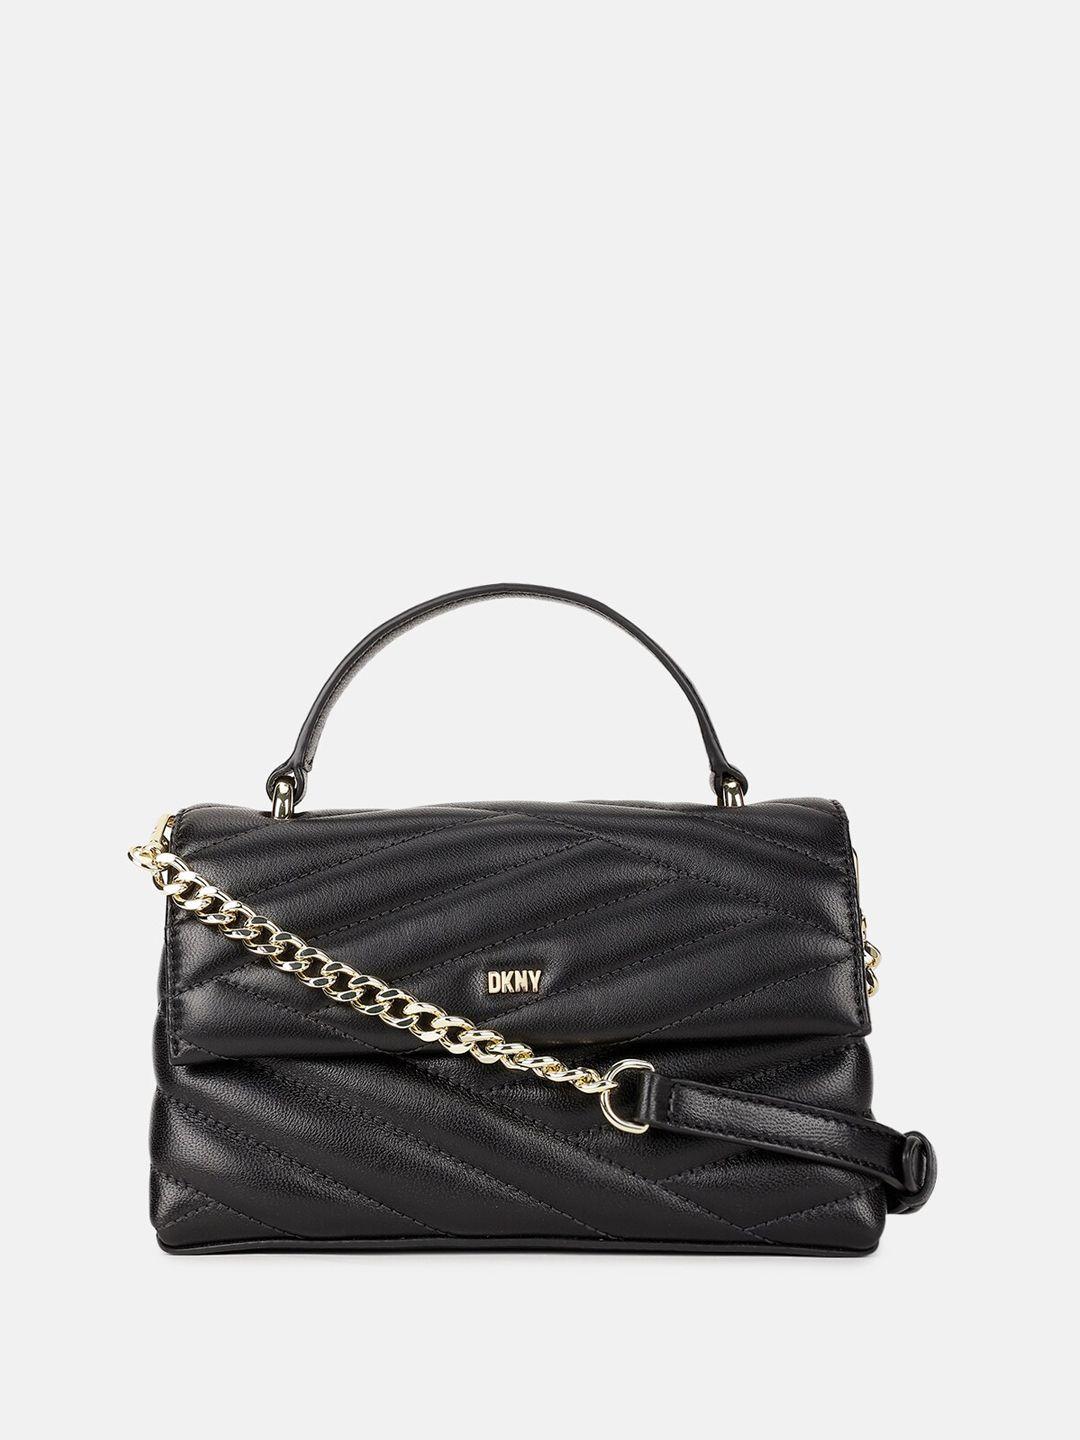 dkny leather sling bag with quilted